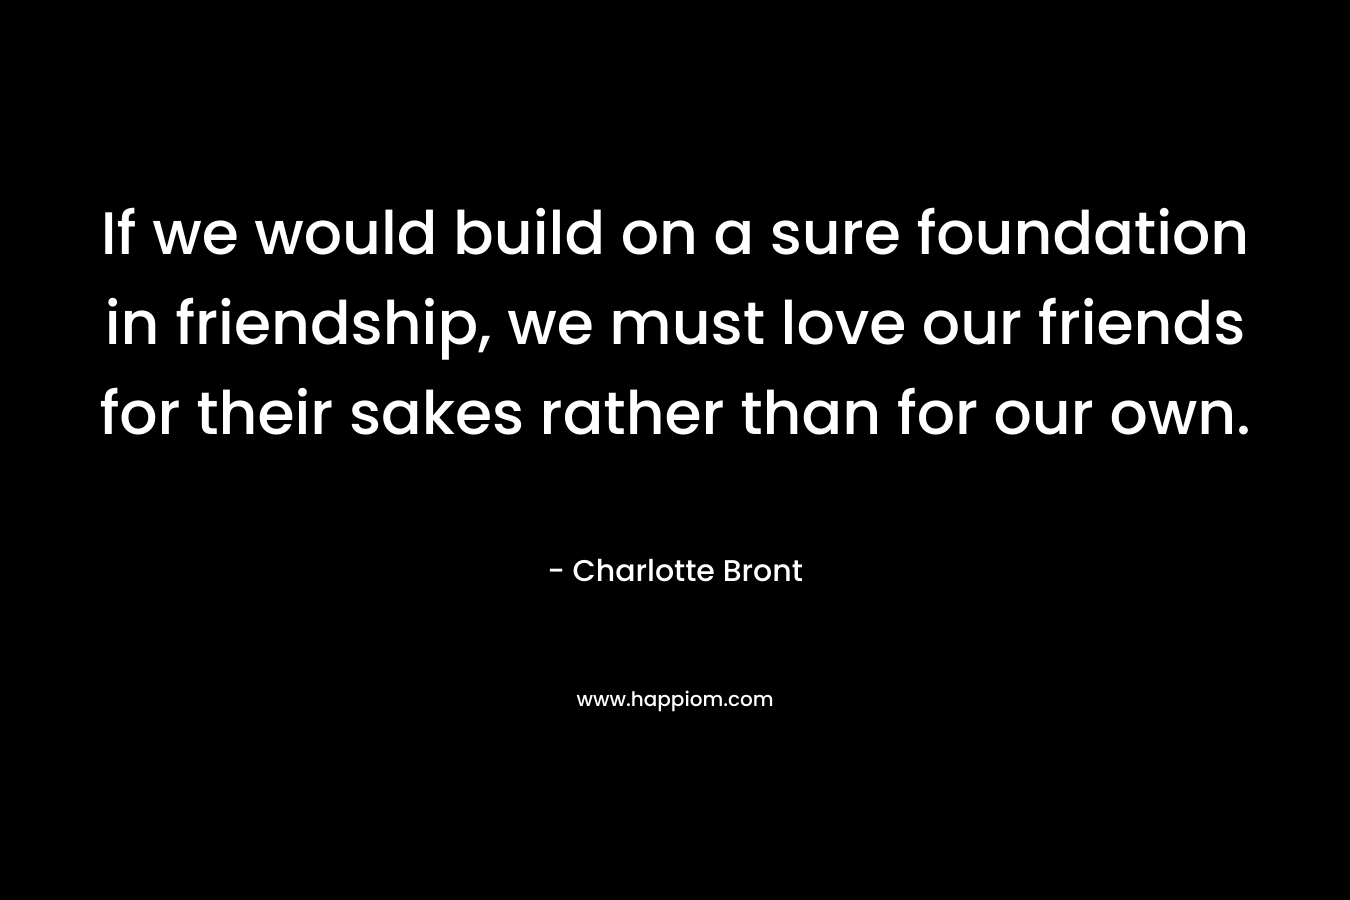 If we would build on a sure foundation in friendship, we must love our friends for their sakes rather than for our own. – Charlotte Bront